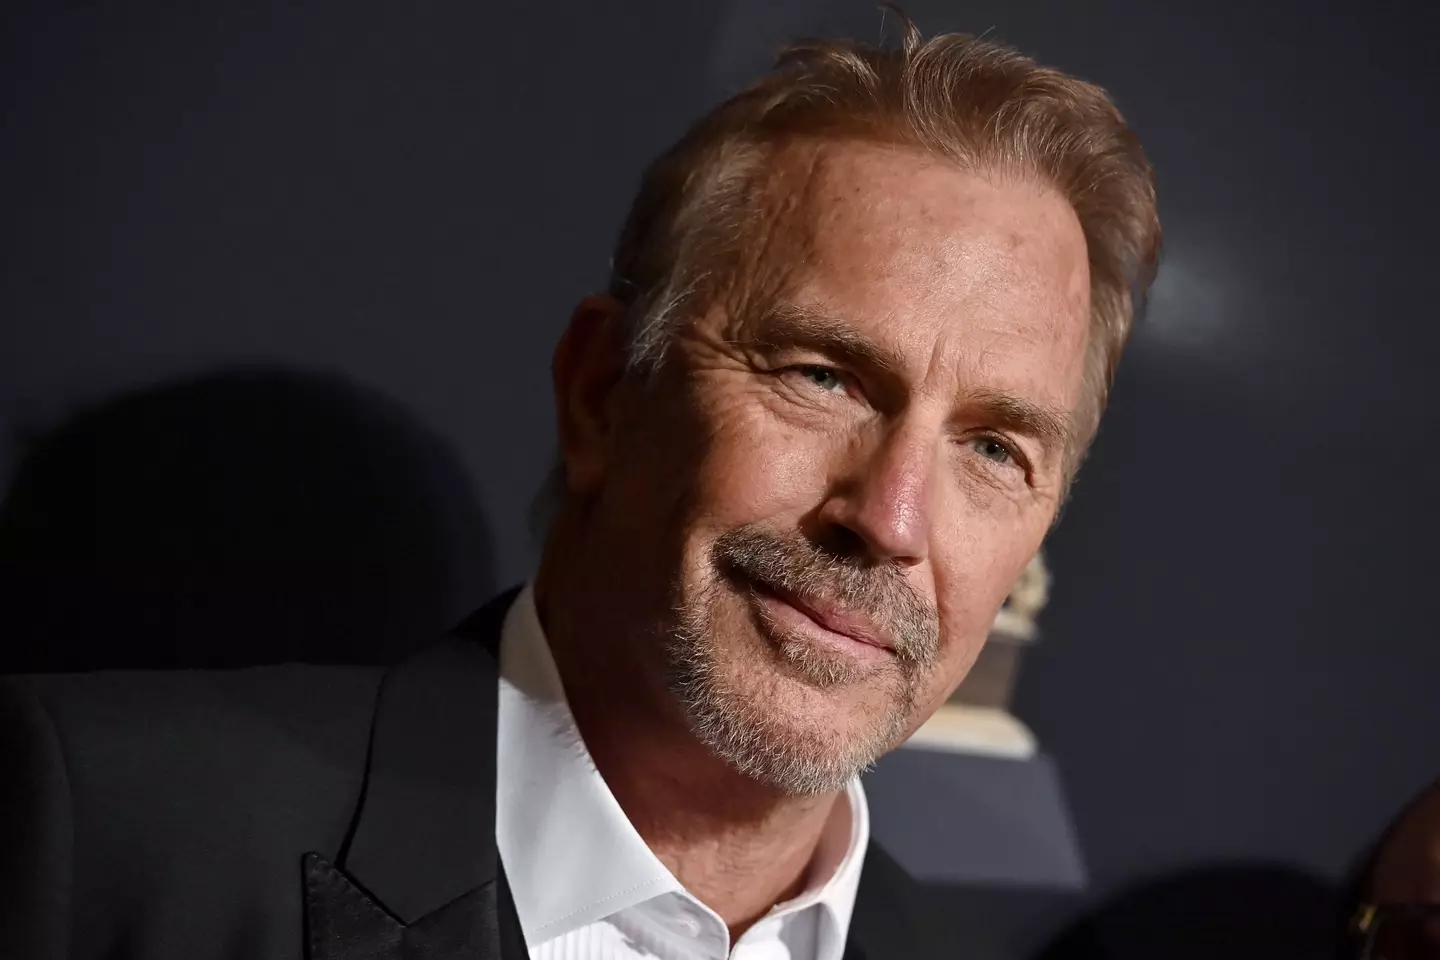 Kevin Costner’s estranged wife has slammed his $52,000 child support payment proposal.